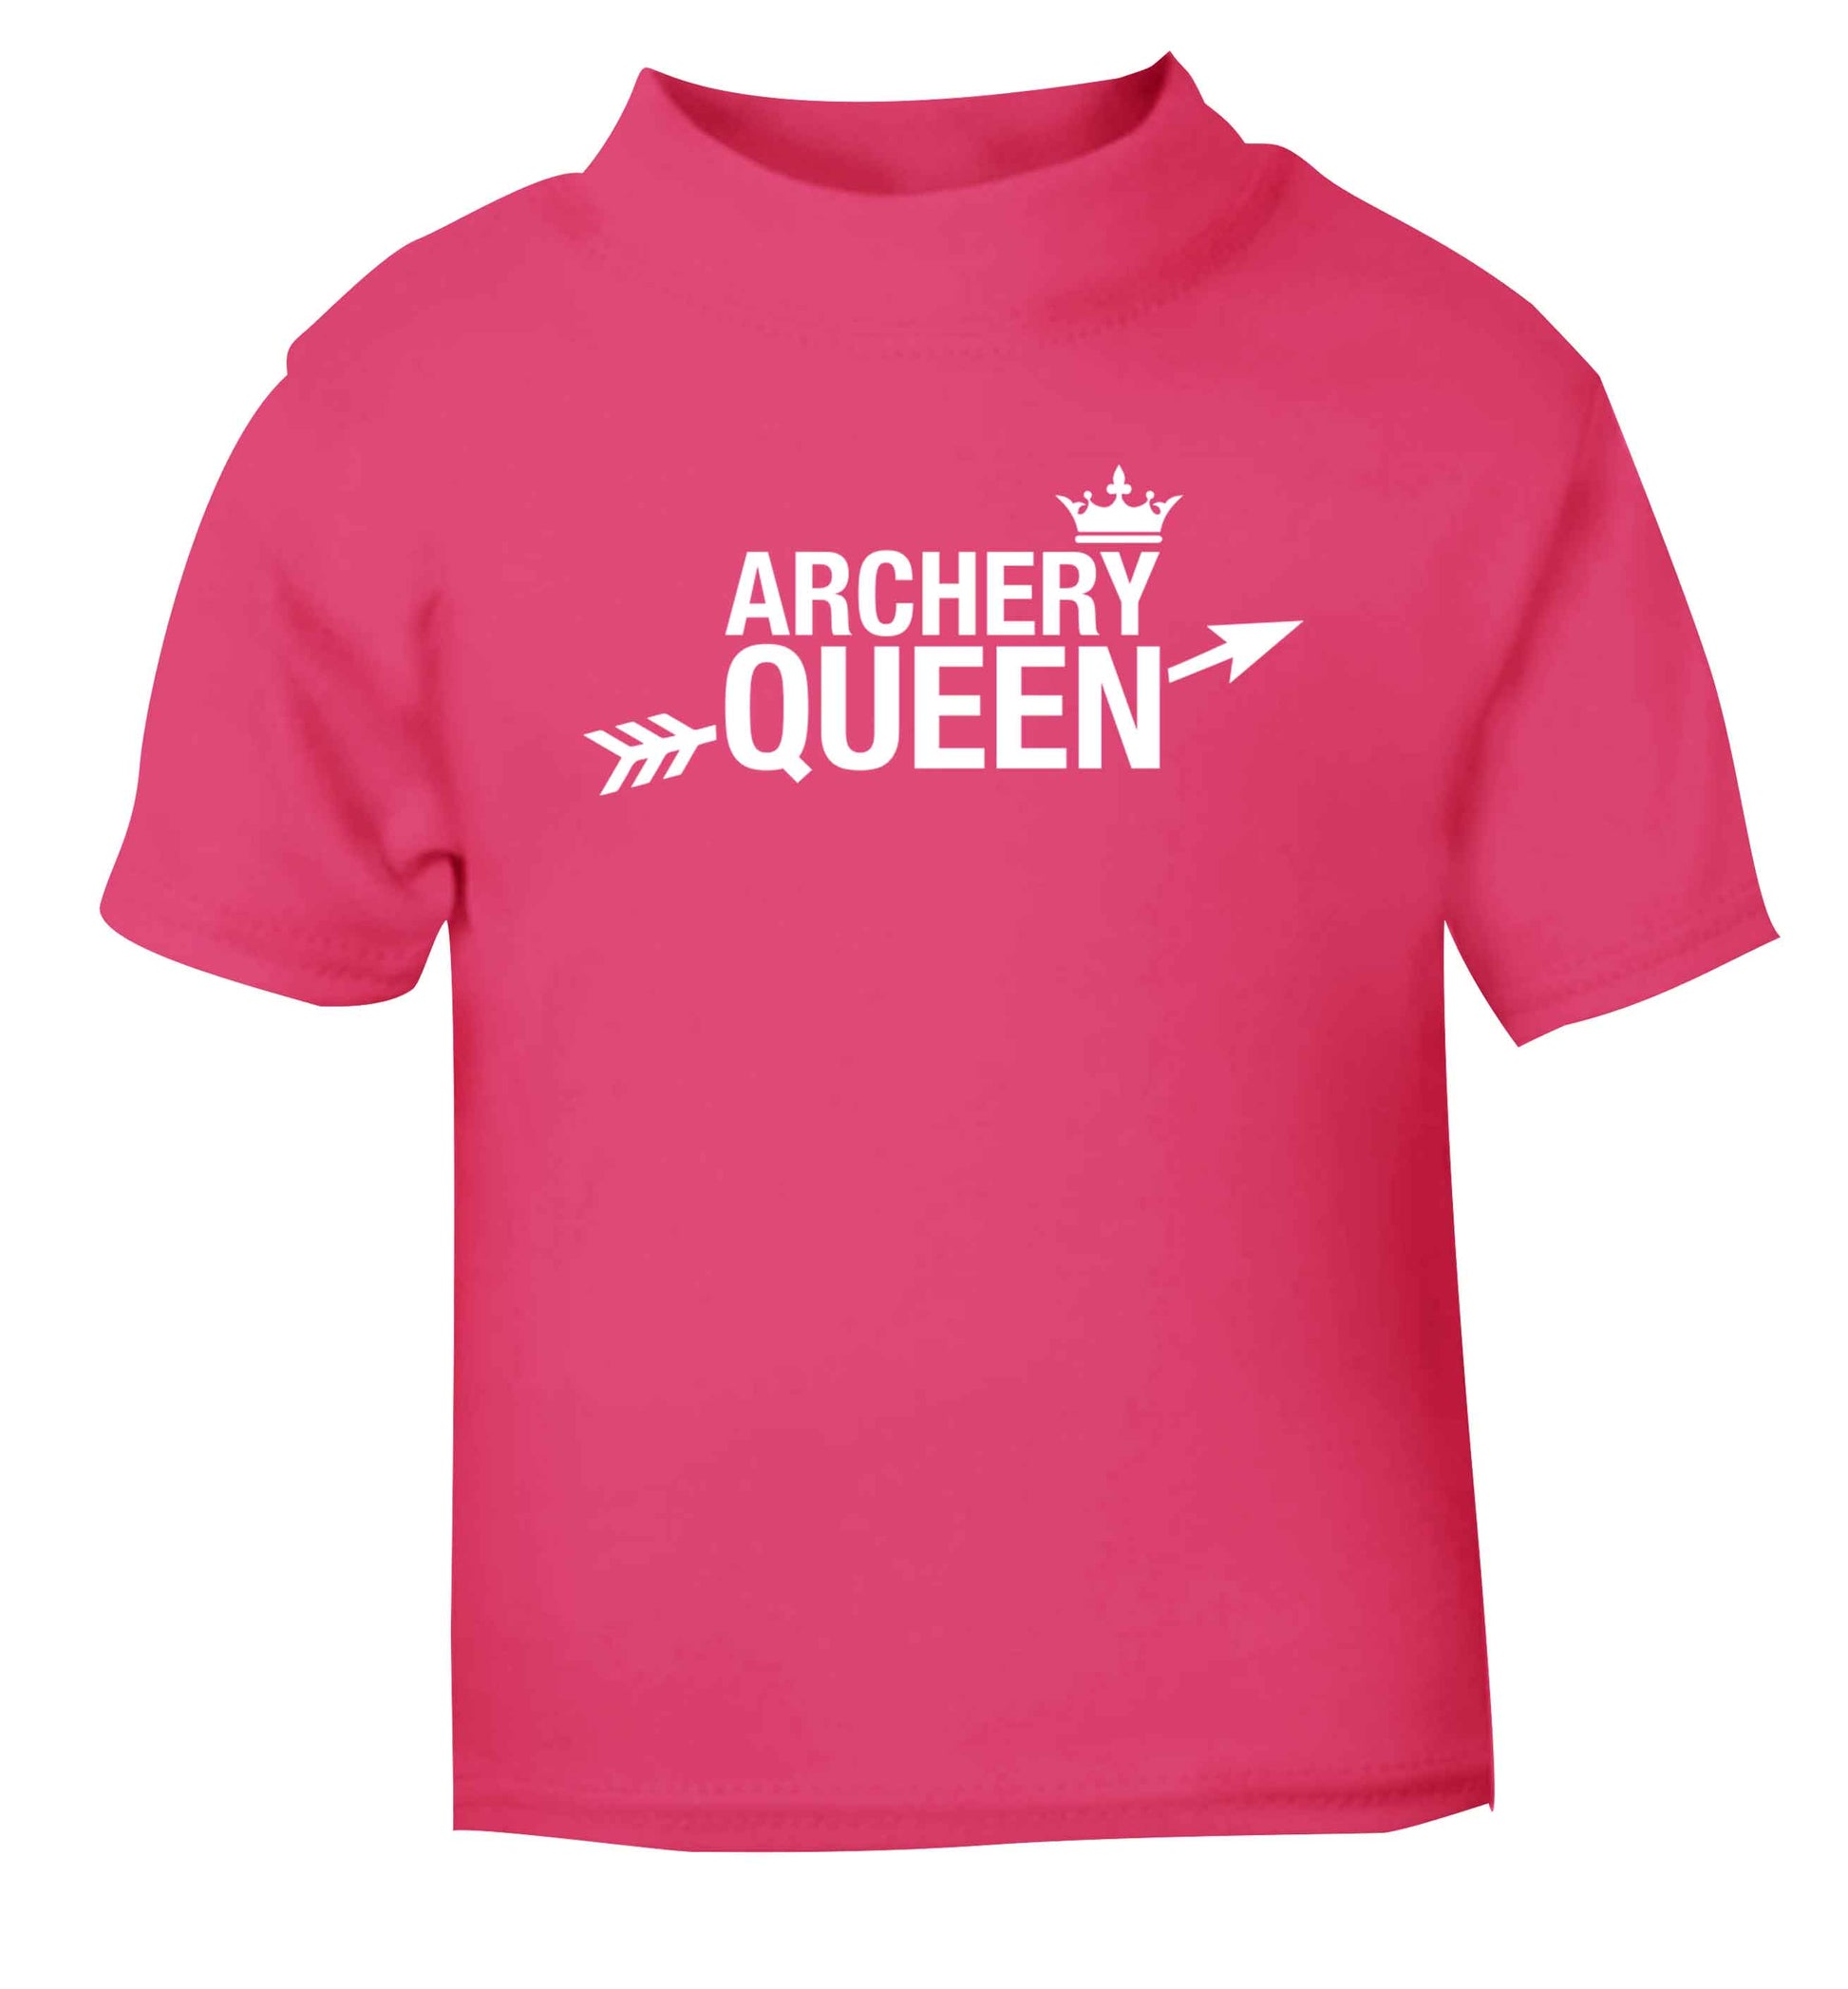 Archery queen pink Baby Toddler Tshirt 2 Years